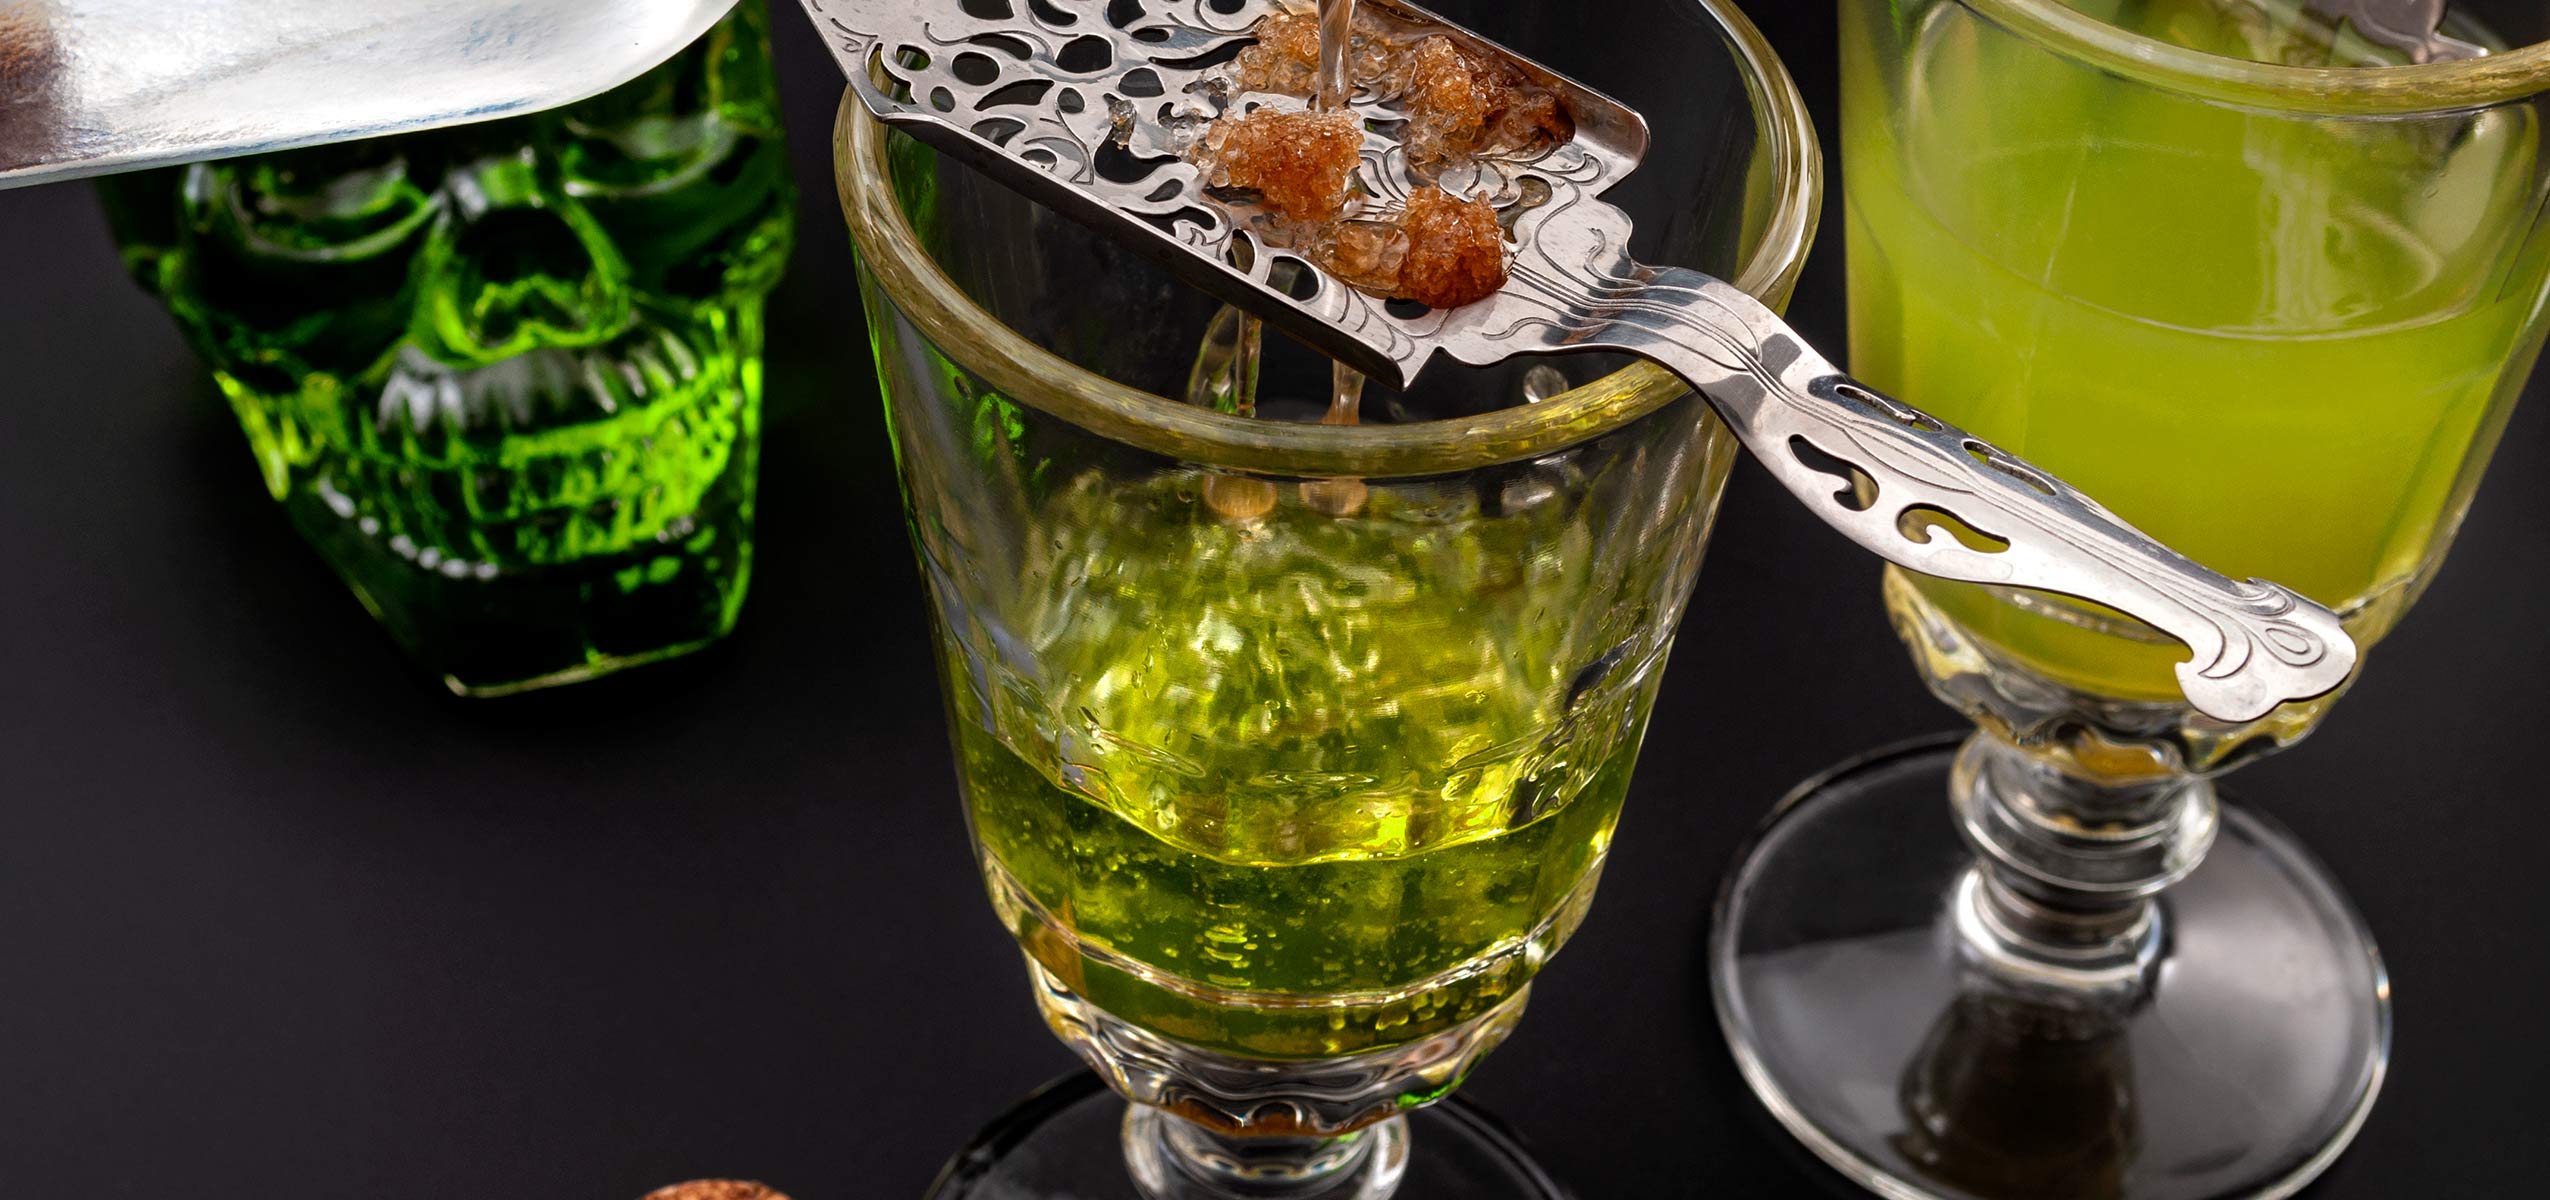 The History of Absinthe | Tasting and Preparing Absinthe